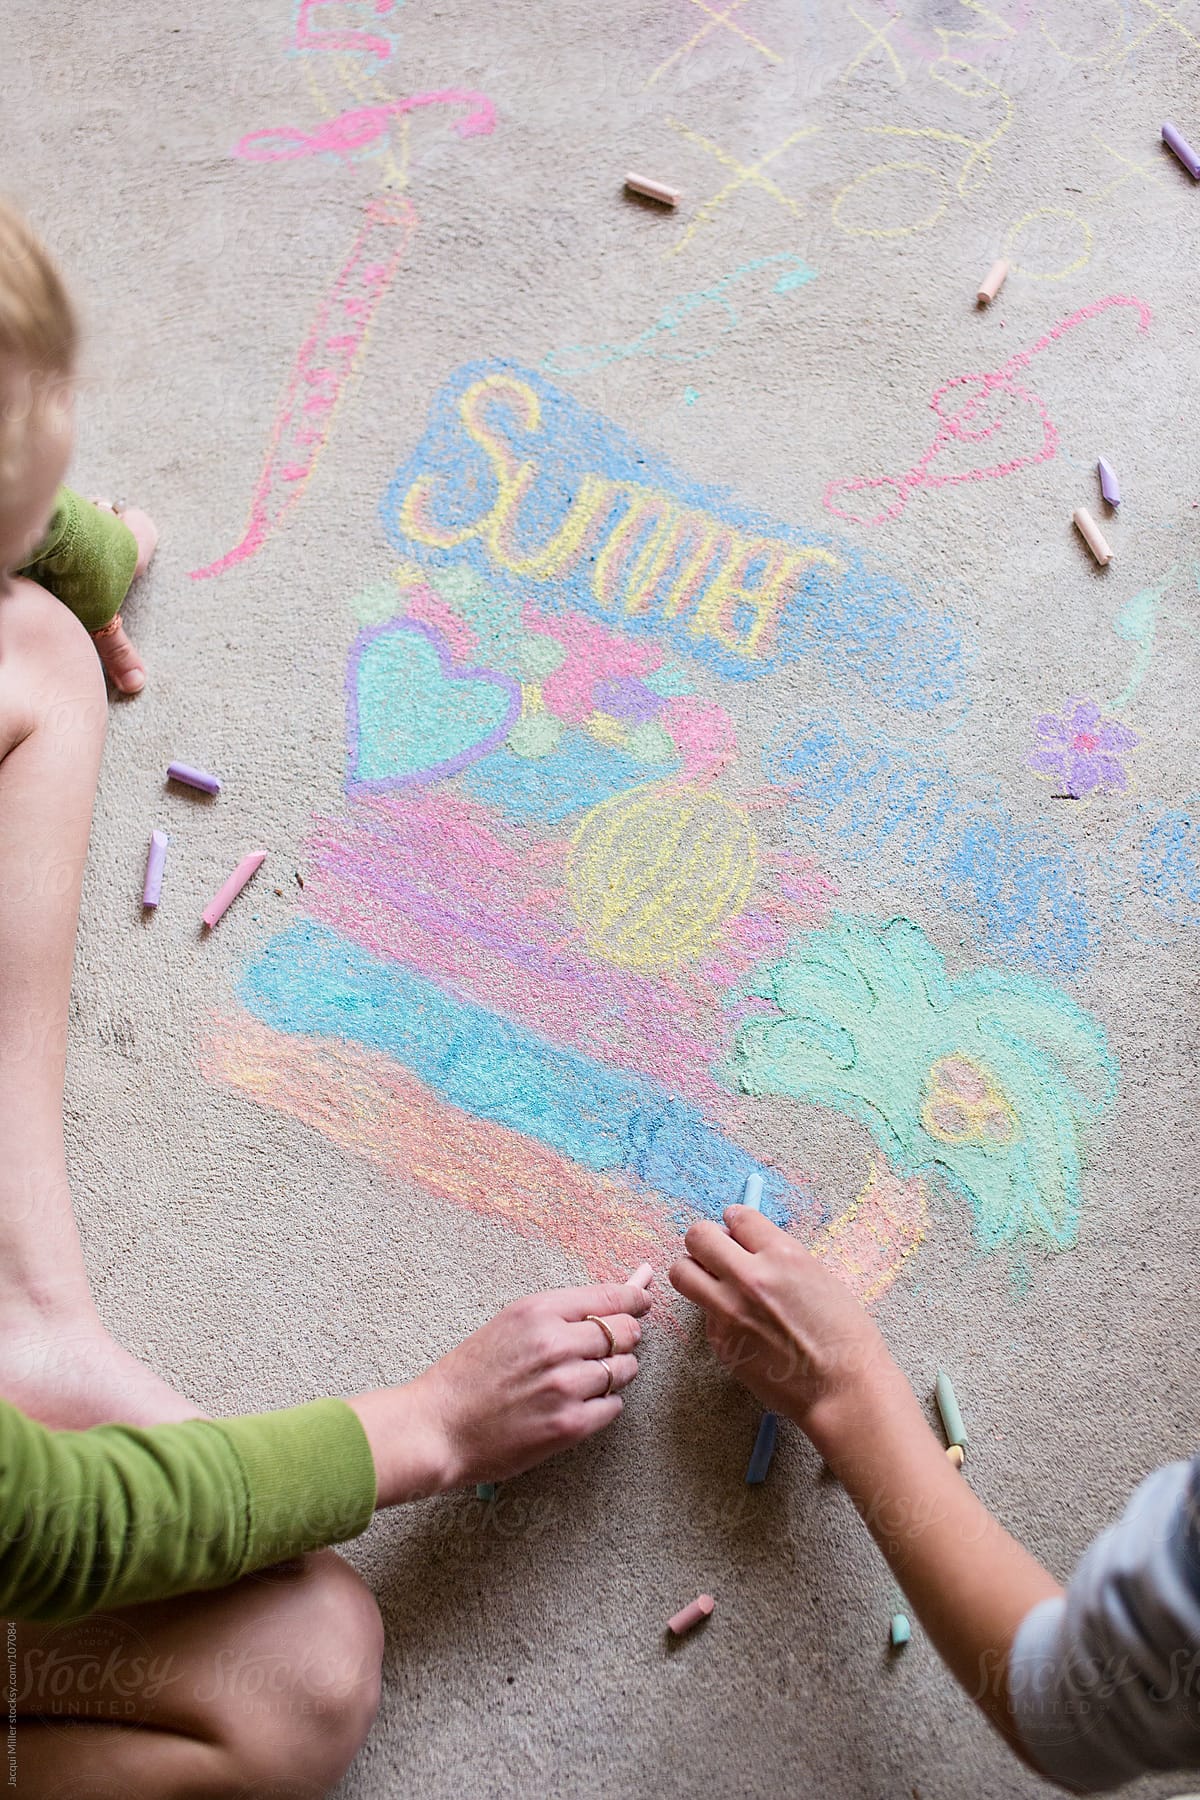 Two Girls Draw With Chalk On A Concrete Floor By Stocksy Contributor Jacqui Miller Stocksy 7575